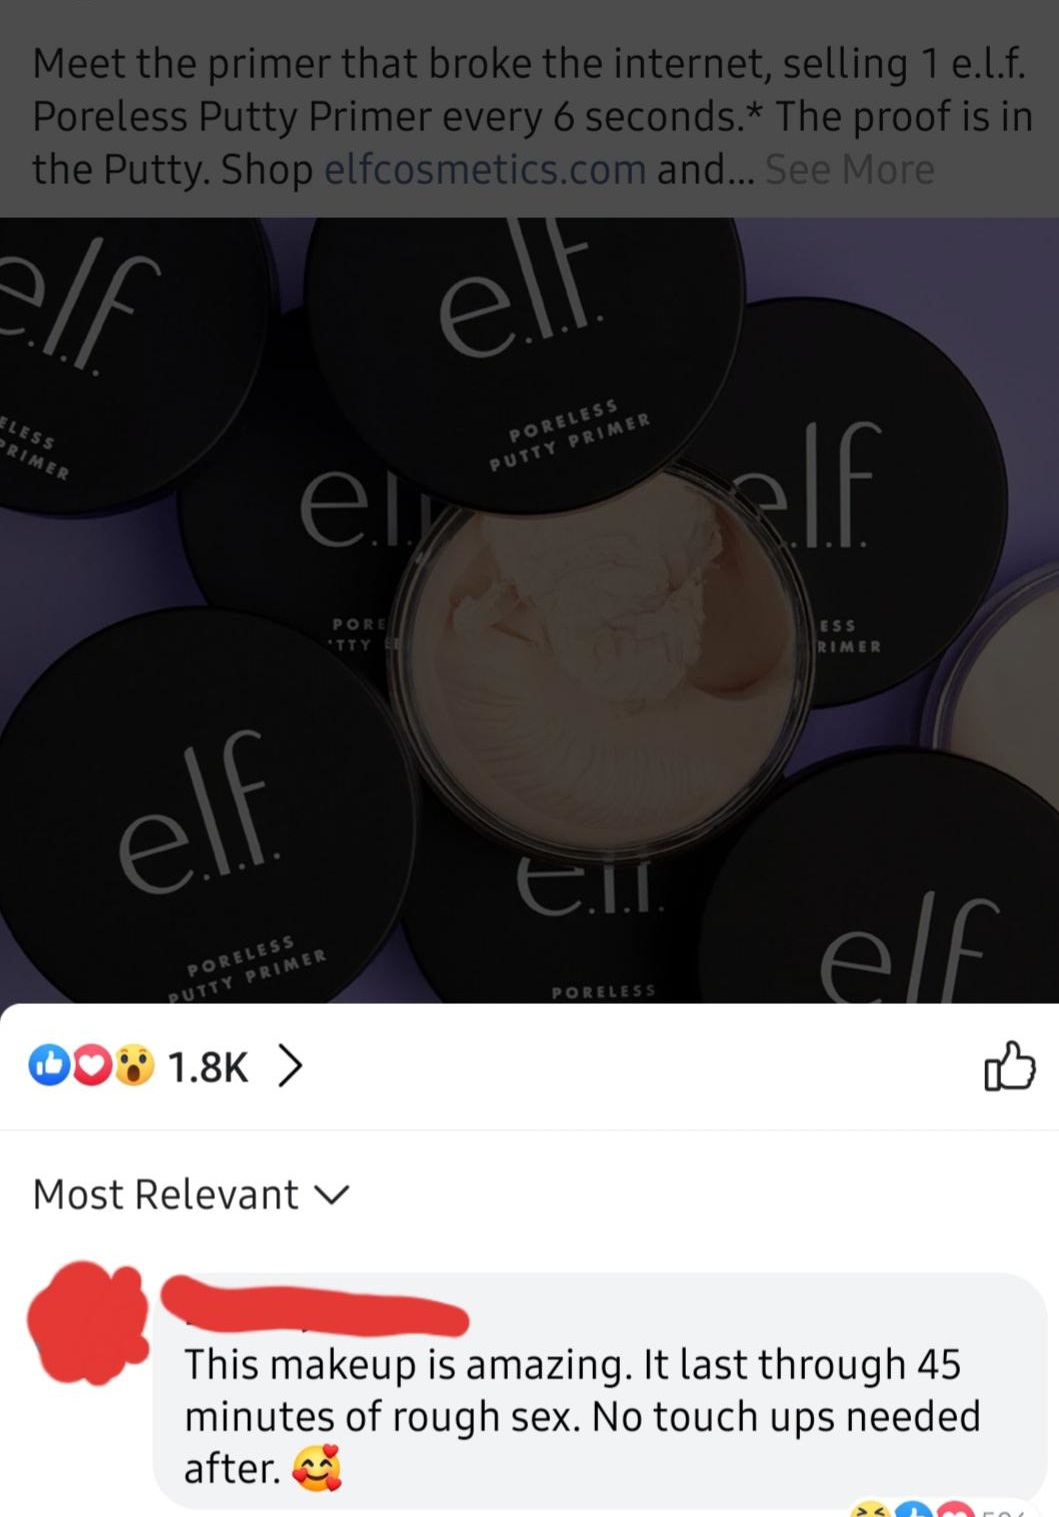 sex memes - Meet the primer that broke the internet, selling 1 e.l.f. Poreless Putty Primer every 6 seconds. The proof is in the Putty. Shop elfcosmetics.com and... See More Elfell Eless Primer Poreless Putty Primer Pore Tty Ess Rimer elf Poreless Rutty